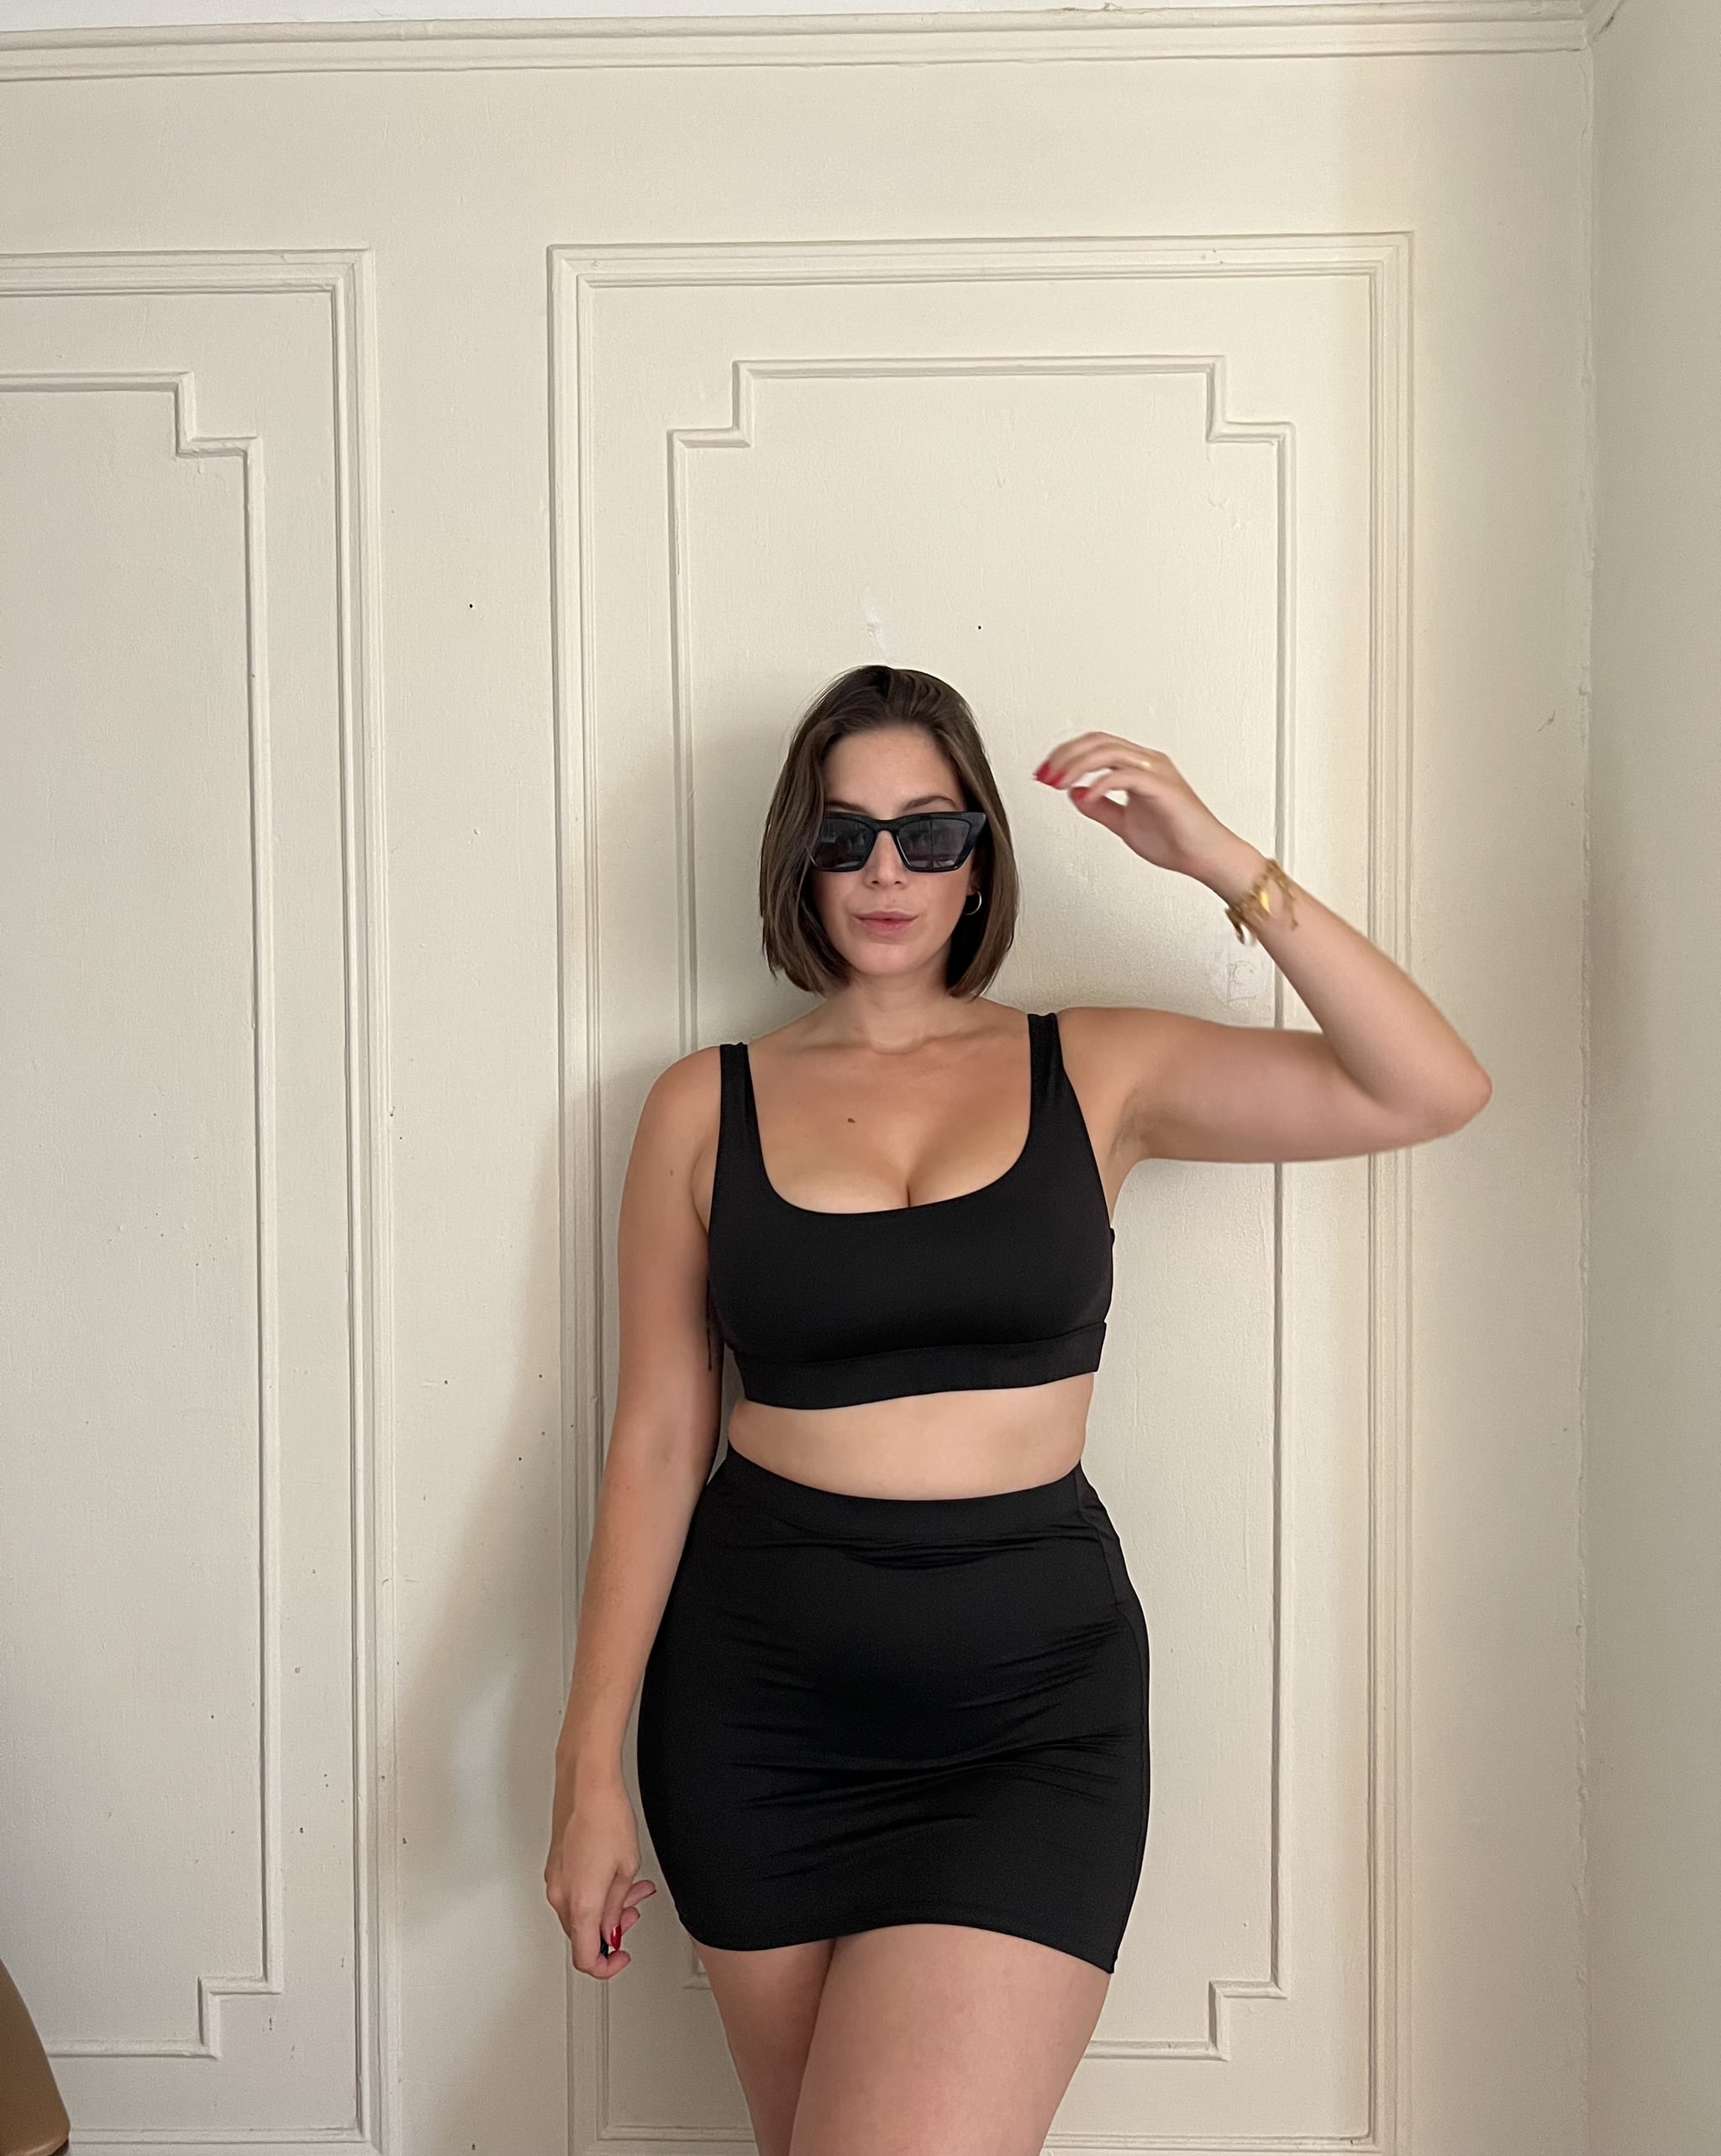 The Swim Tank Bikini Top and Tube Skirt in Black, 3 Editors Test Out Skims'  Viral Swimsuits